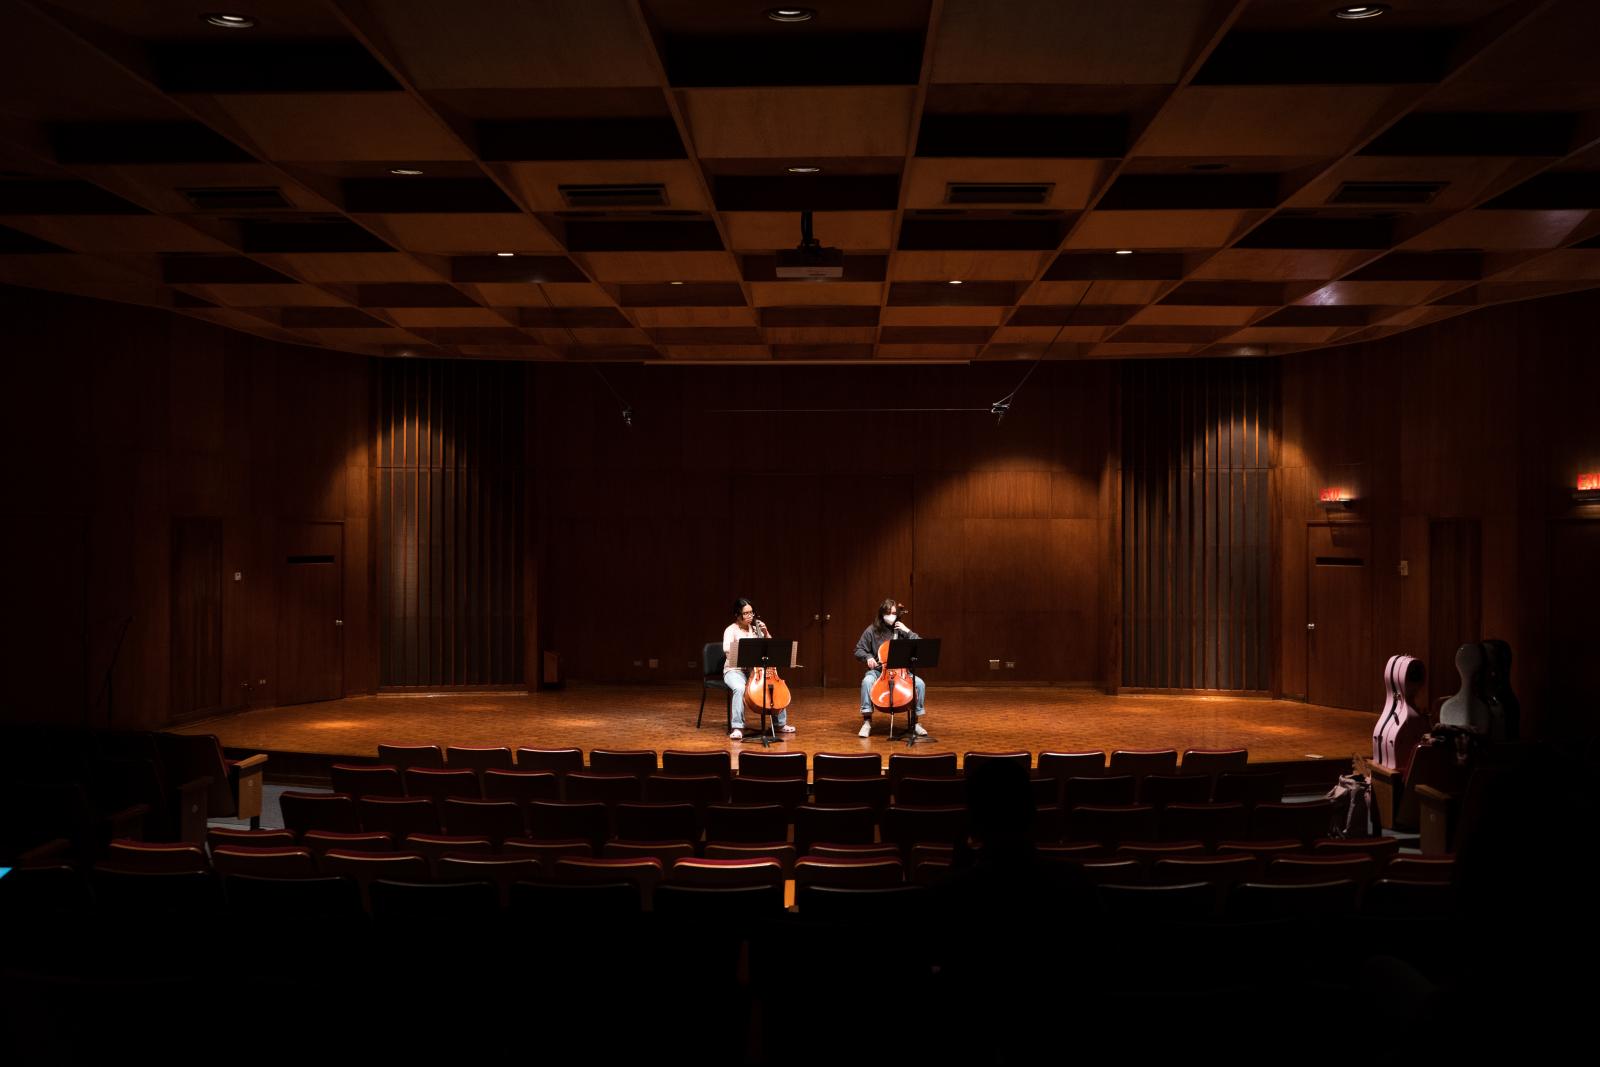 Smaller concert hall with 2 cellists on stage